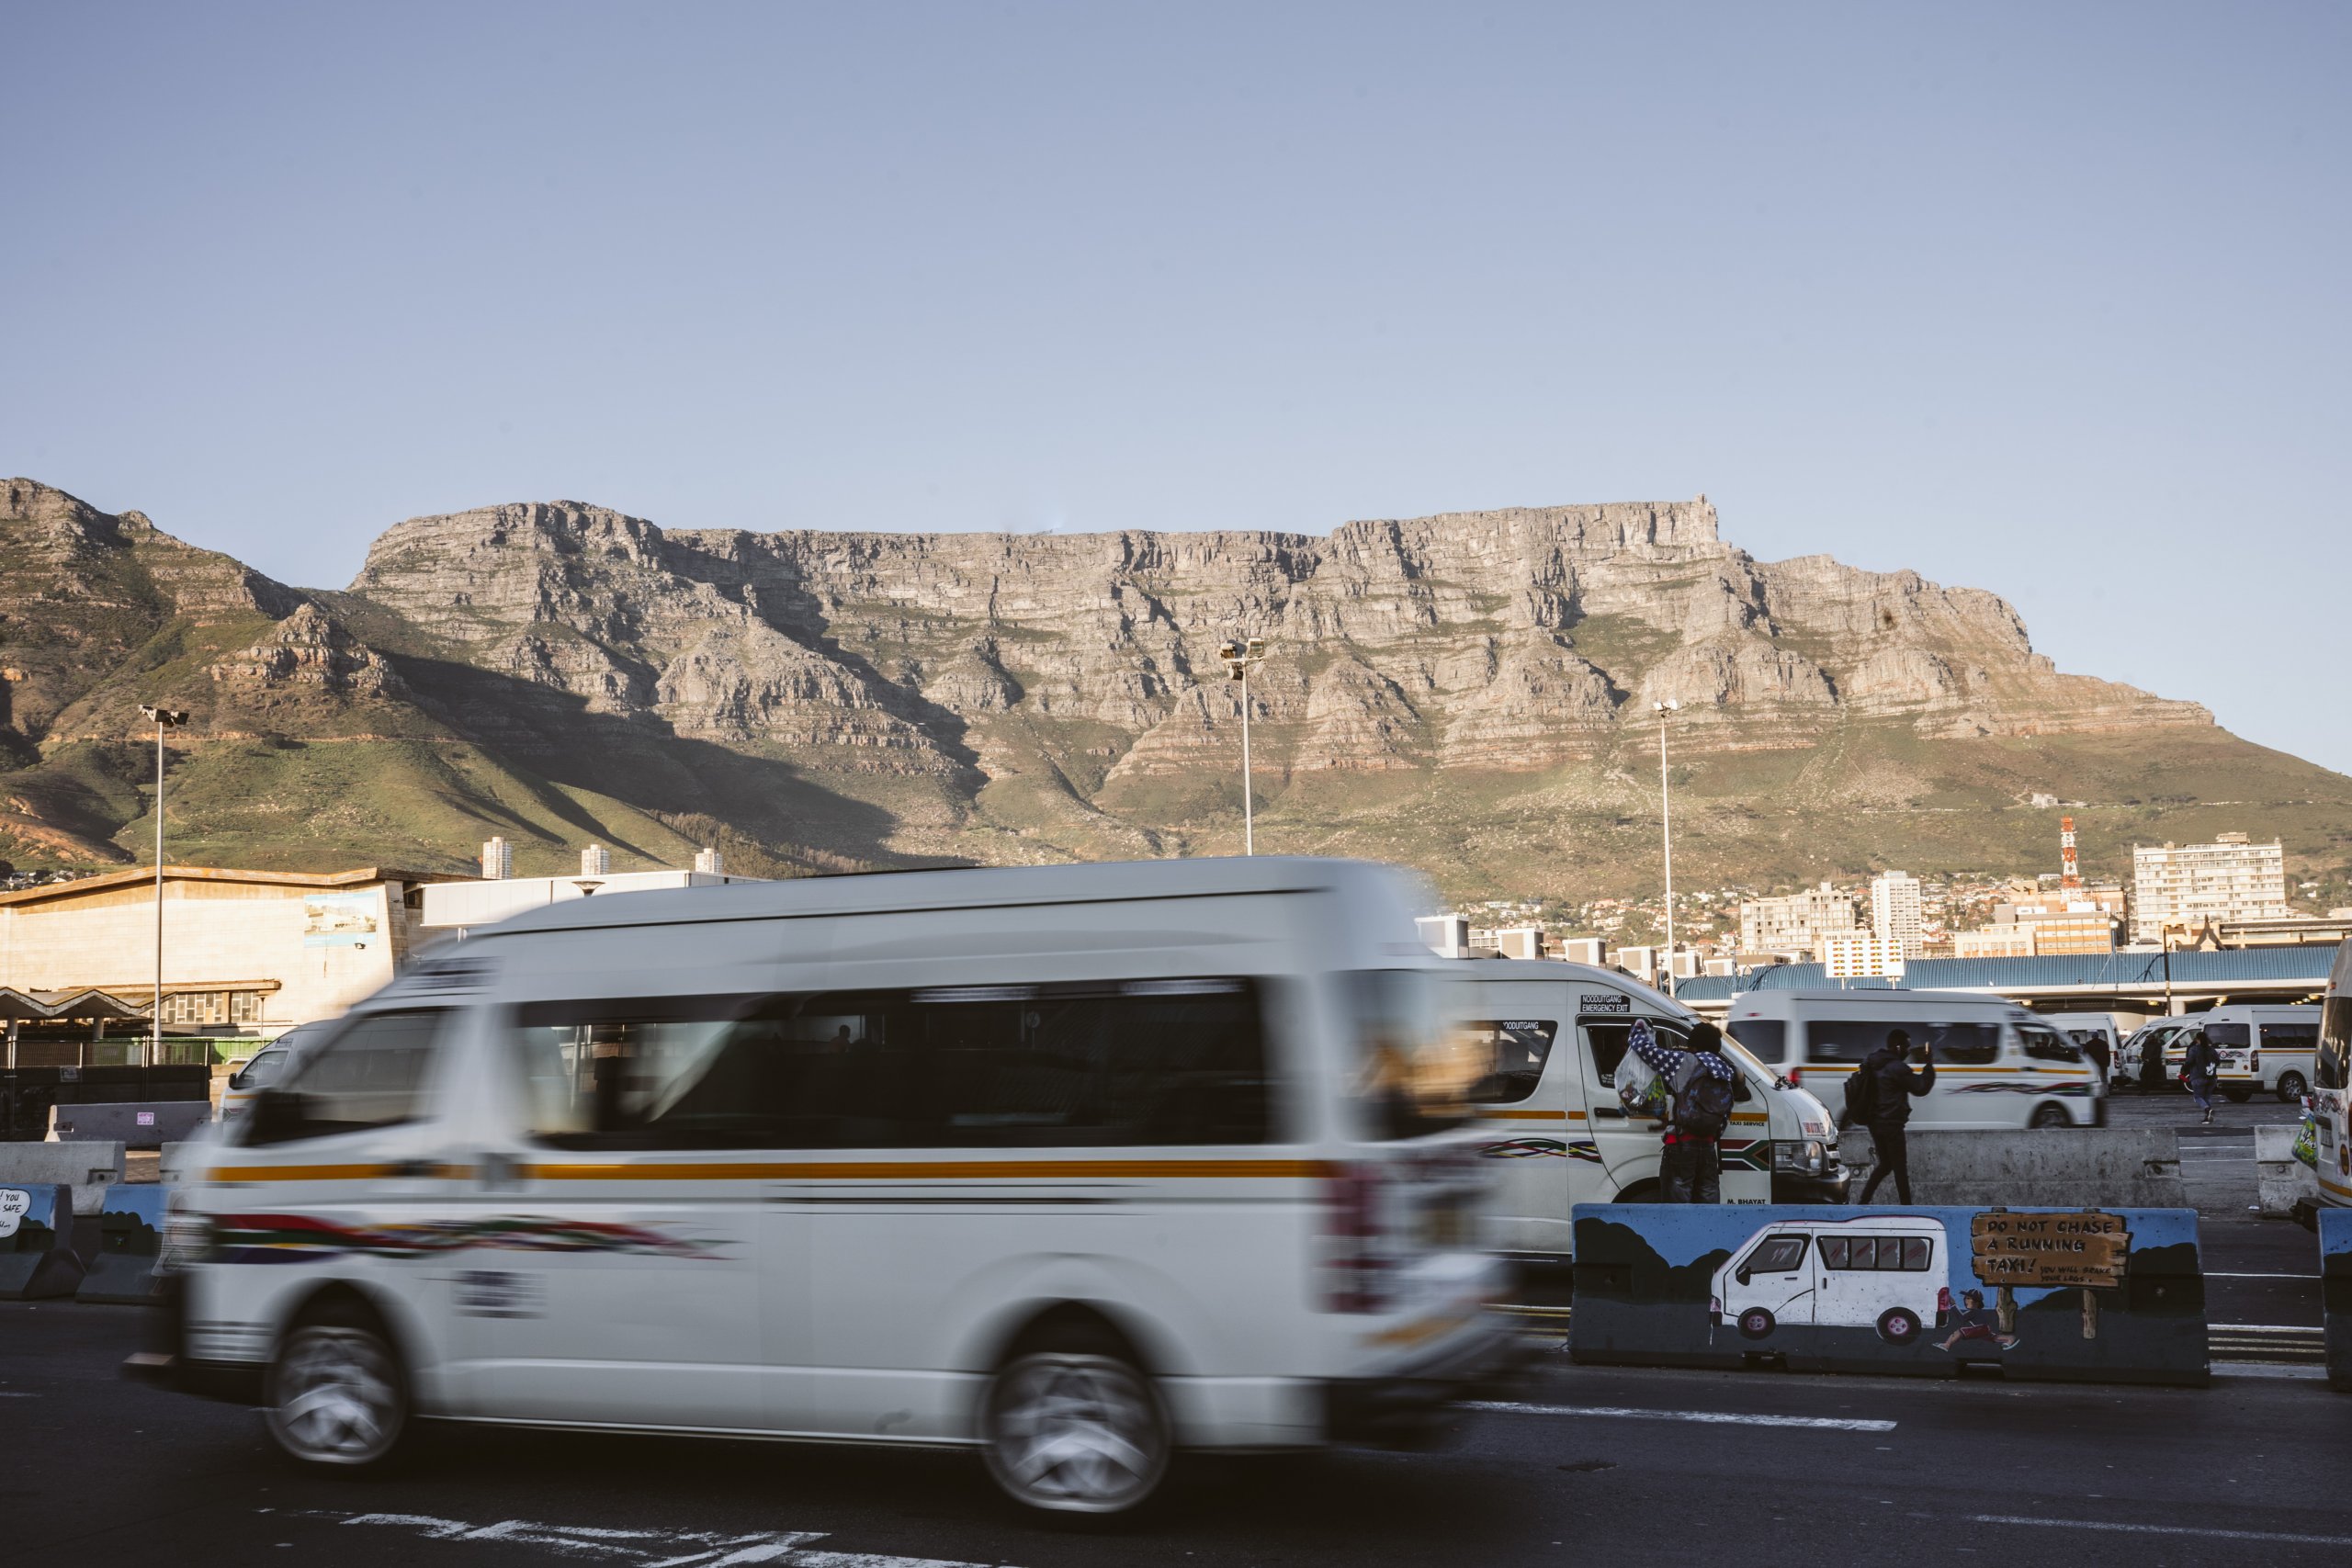 Post lockdown travel demand in South Africa – three plausible futures to prepare for